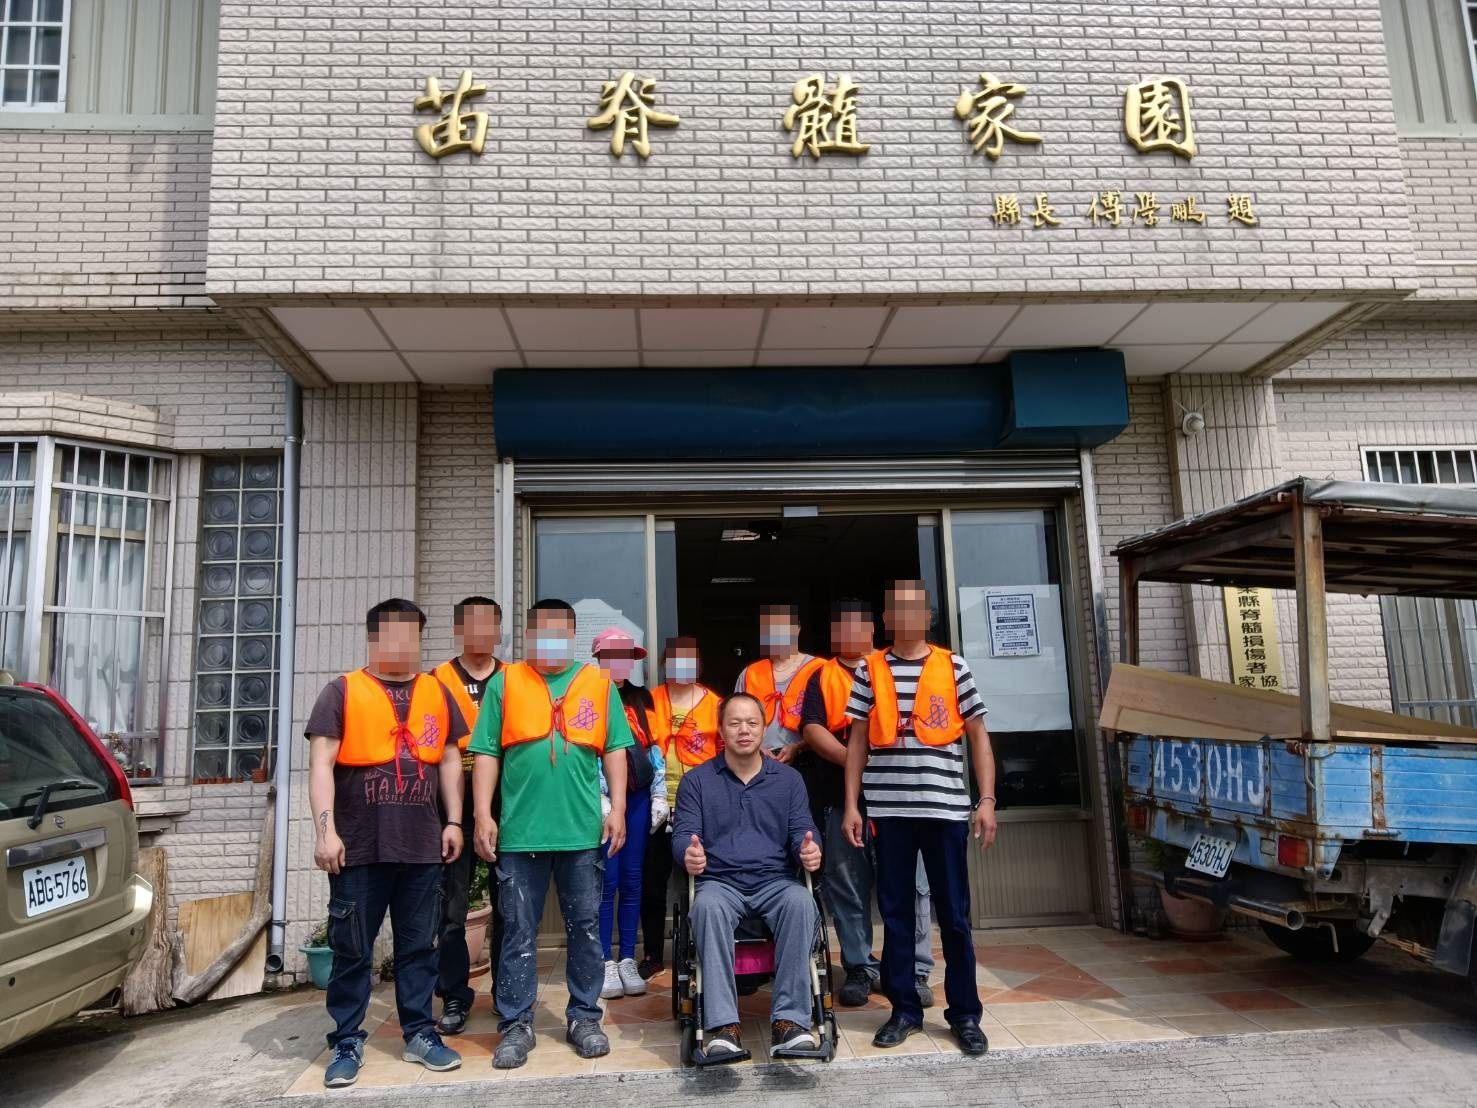 The first stop of the repair team is Miaoli County Spinal Cord Injury Association